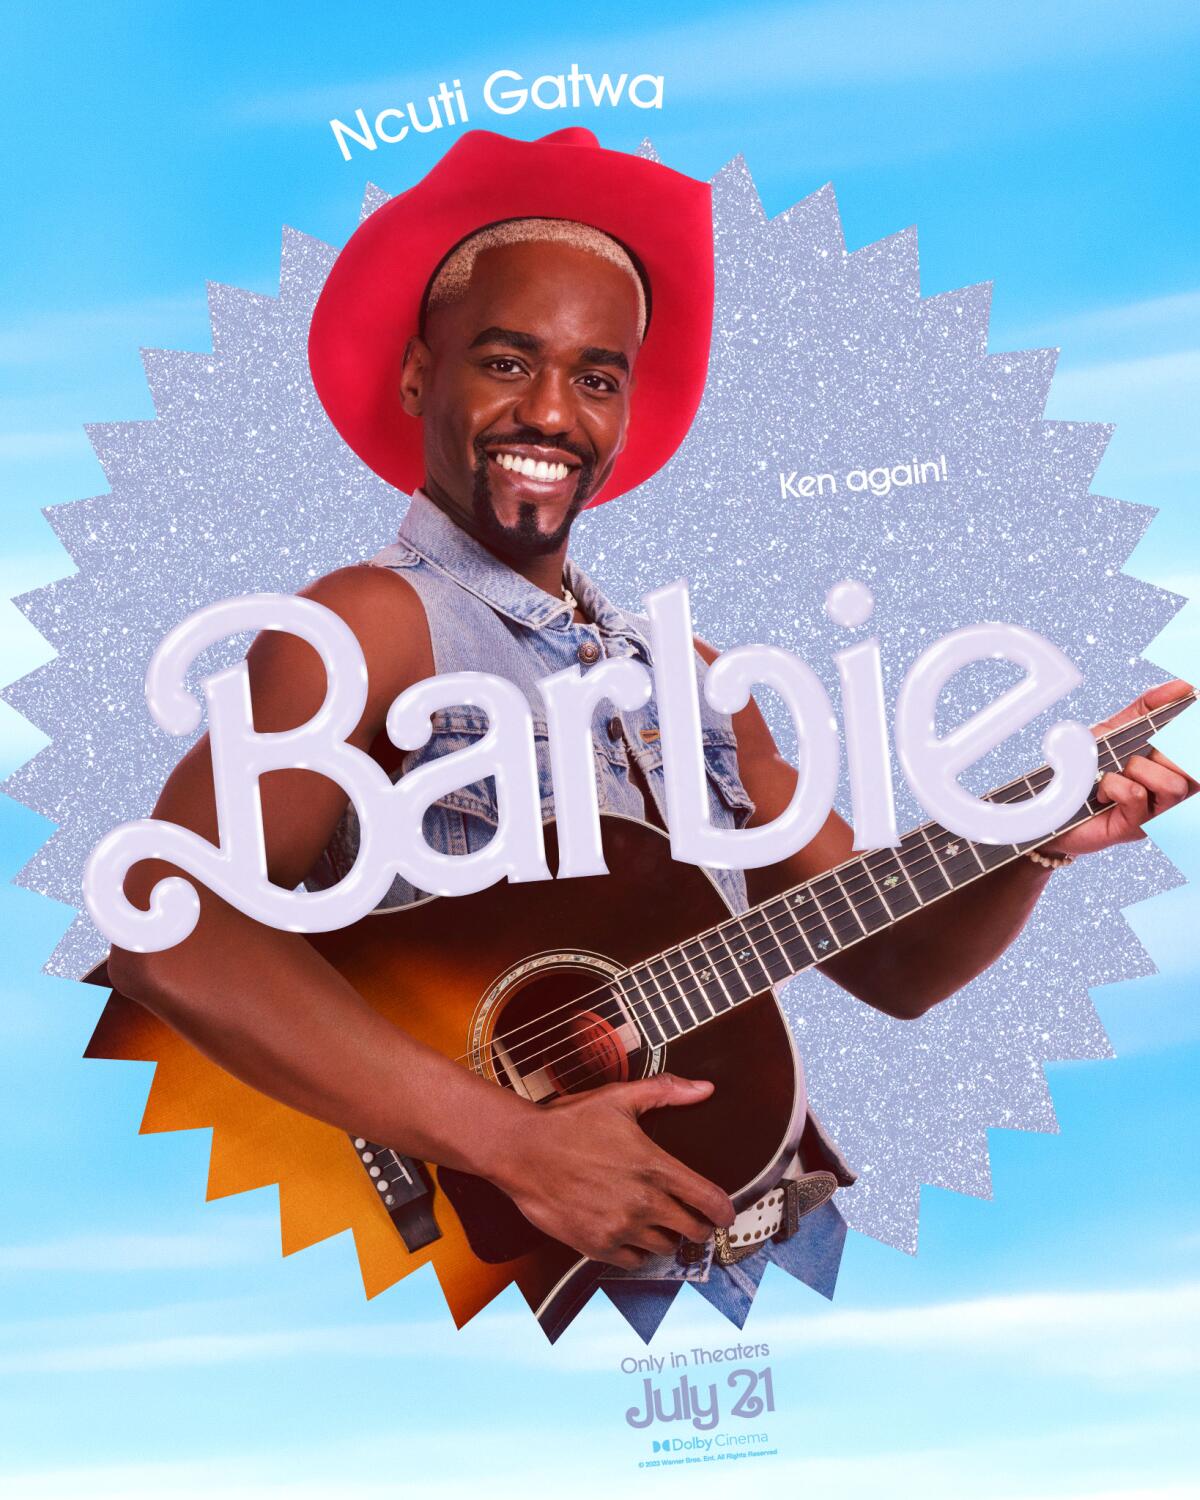 Ncuti Gatwa smiles and holds an acoustic guitar in a "Barbie" movie poster. He wears a red cowboy hat and denim vest.